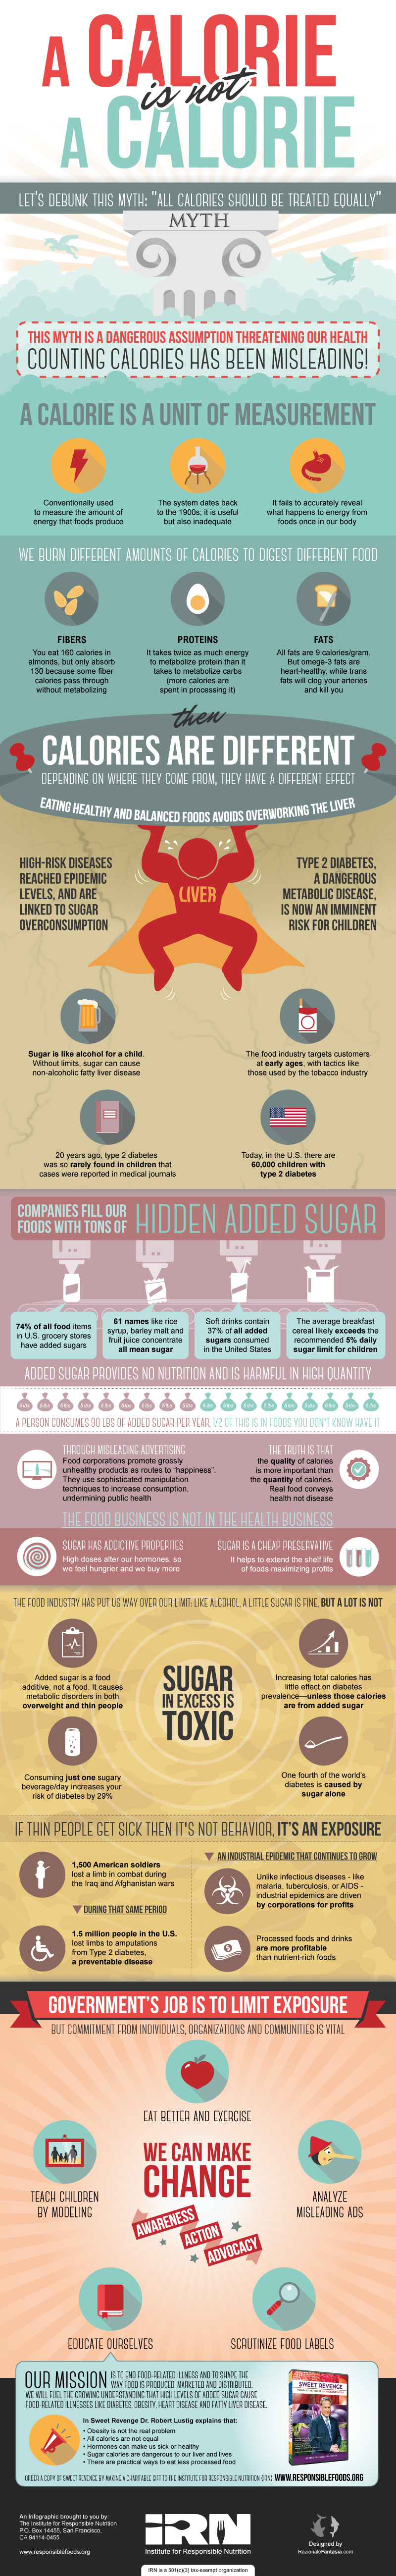 Still Think All Calories Are Equal? Read This Infographic